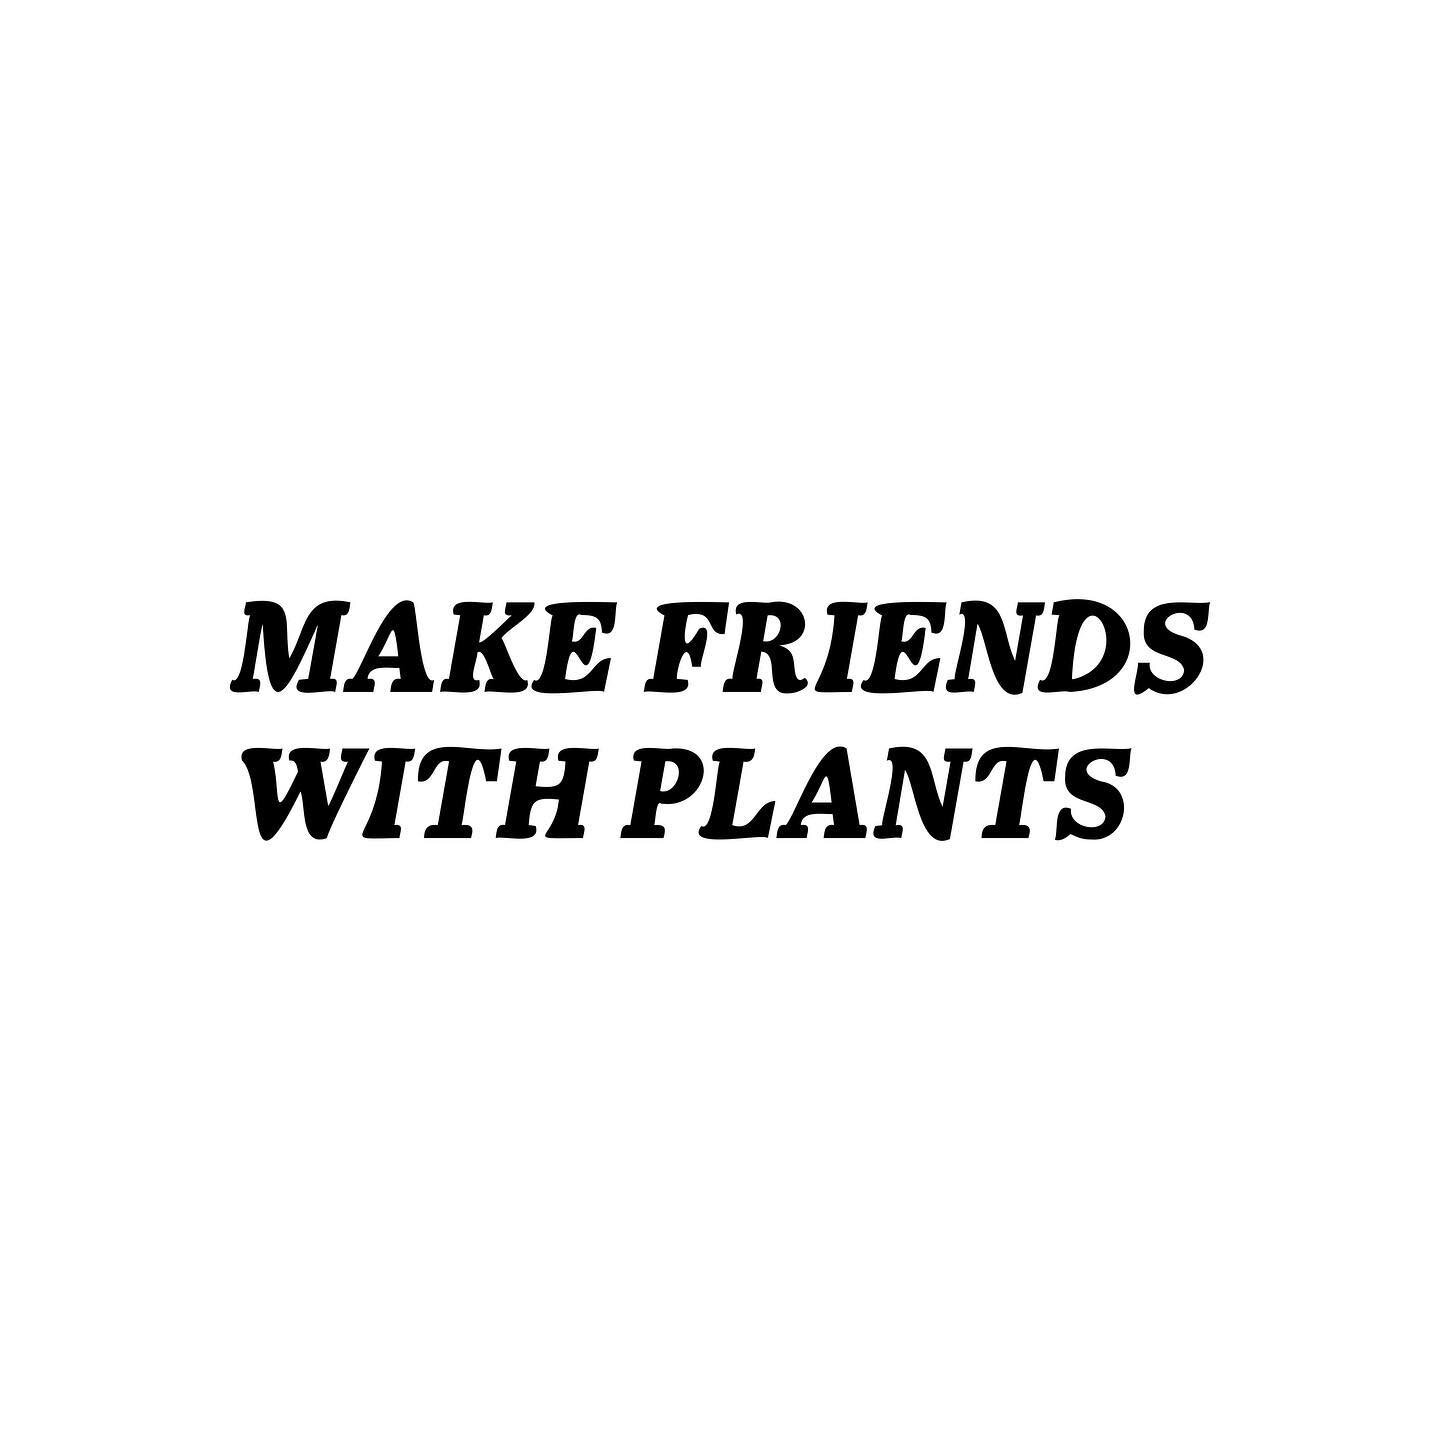 What connects you? 
⚫️
Make friends with plants. Make plants with friends. Our new Free Radical unisex skincare line features an exfoliating Toker Balm and Free Radical spot treatment oil. 
⚫️
These are available in our shop on CHEECHABLE.COM and all